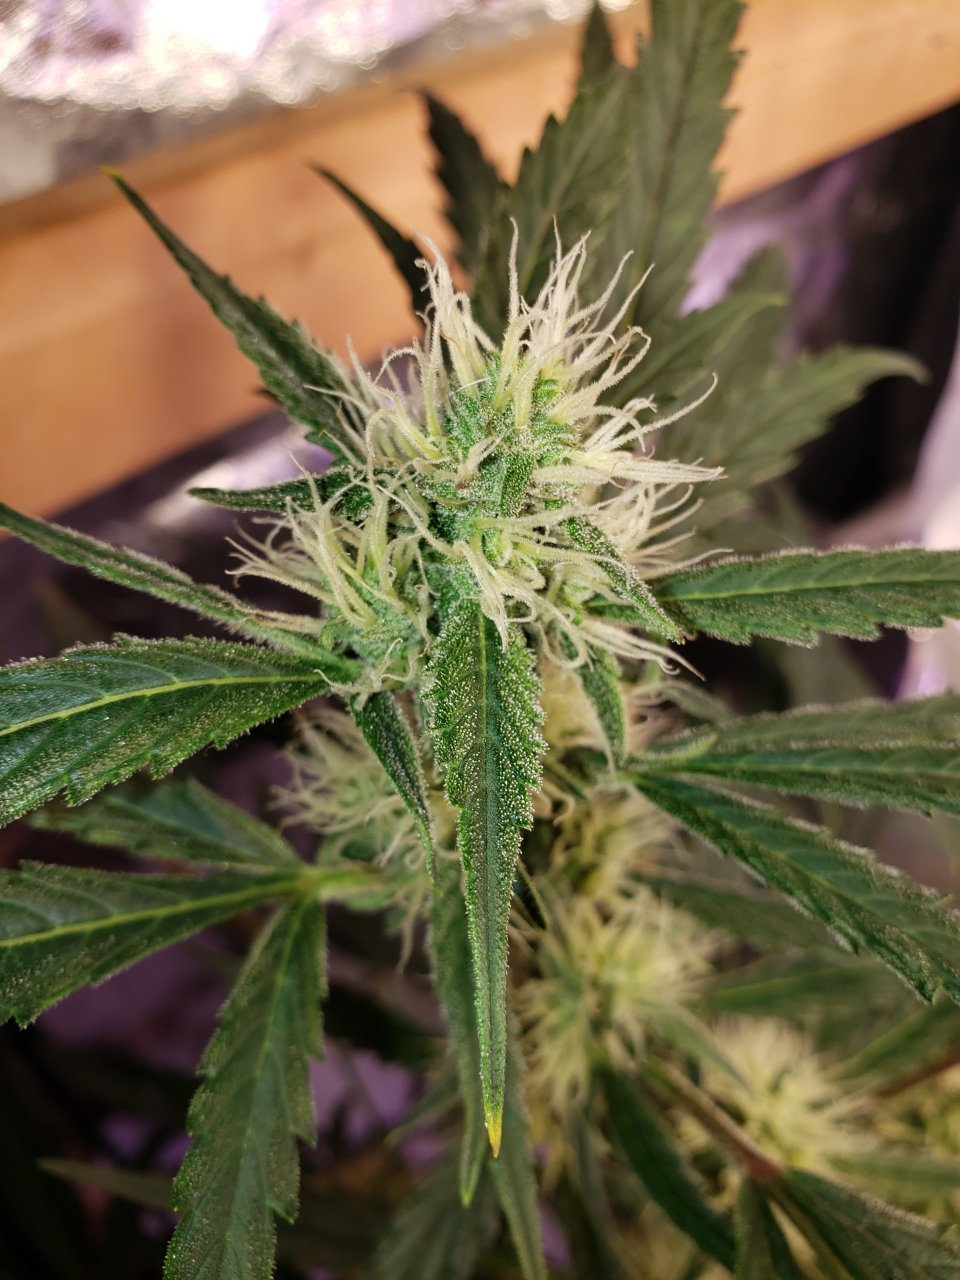 Bluedream Auto frost is starting yay